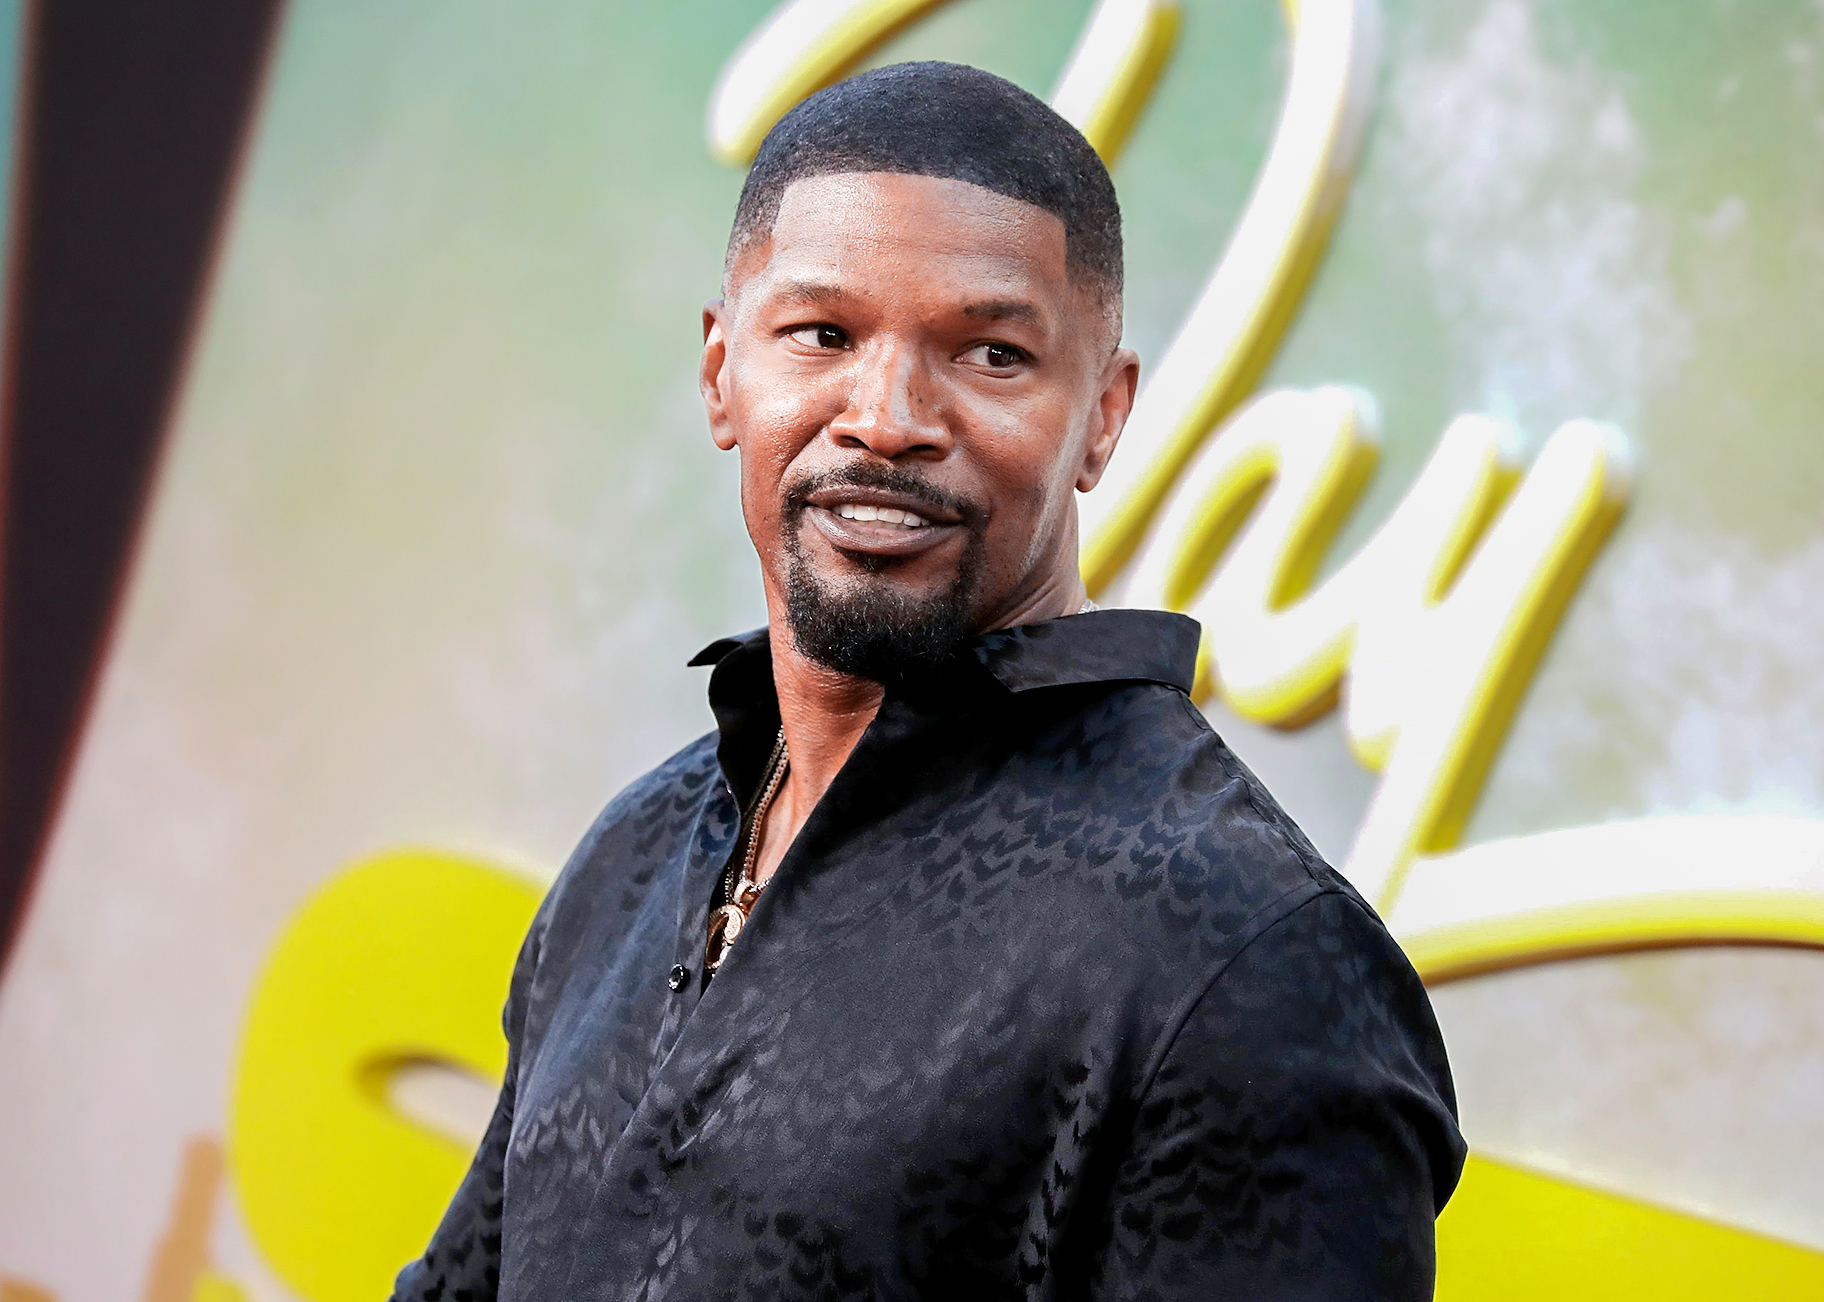 Jamie Foxx says sickness took him to 'hell and back,' but he's